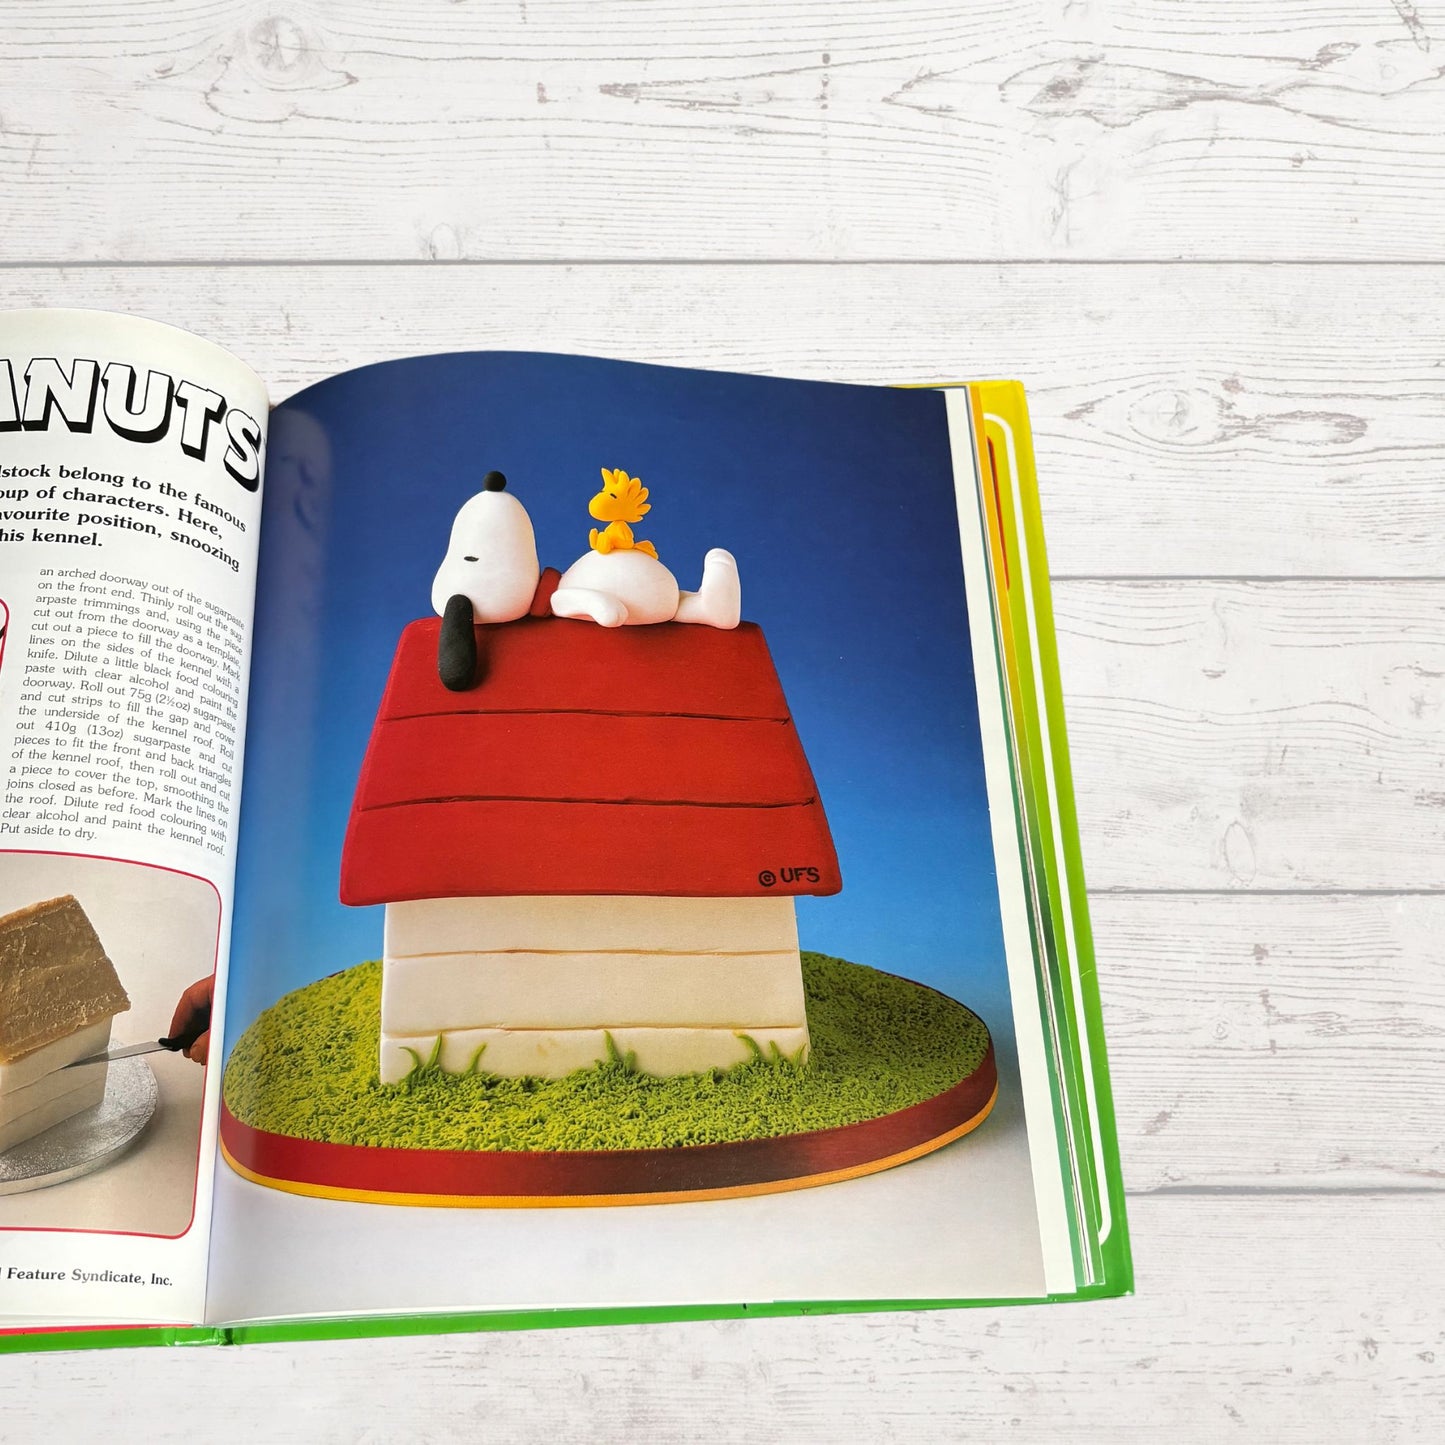 Favourite Character Cakes: A Vintage Cake Design Book by Debbie Brown